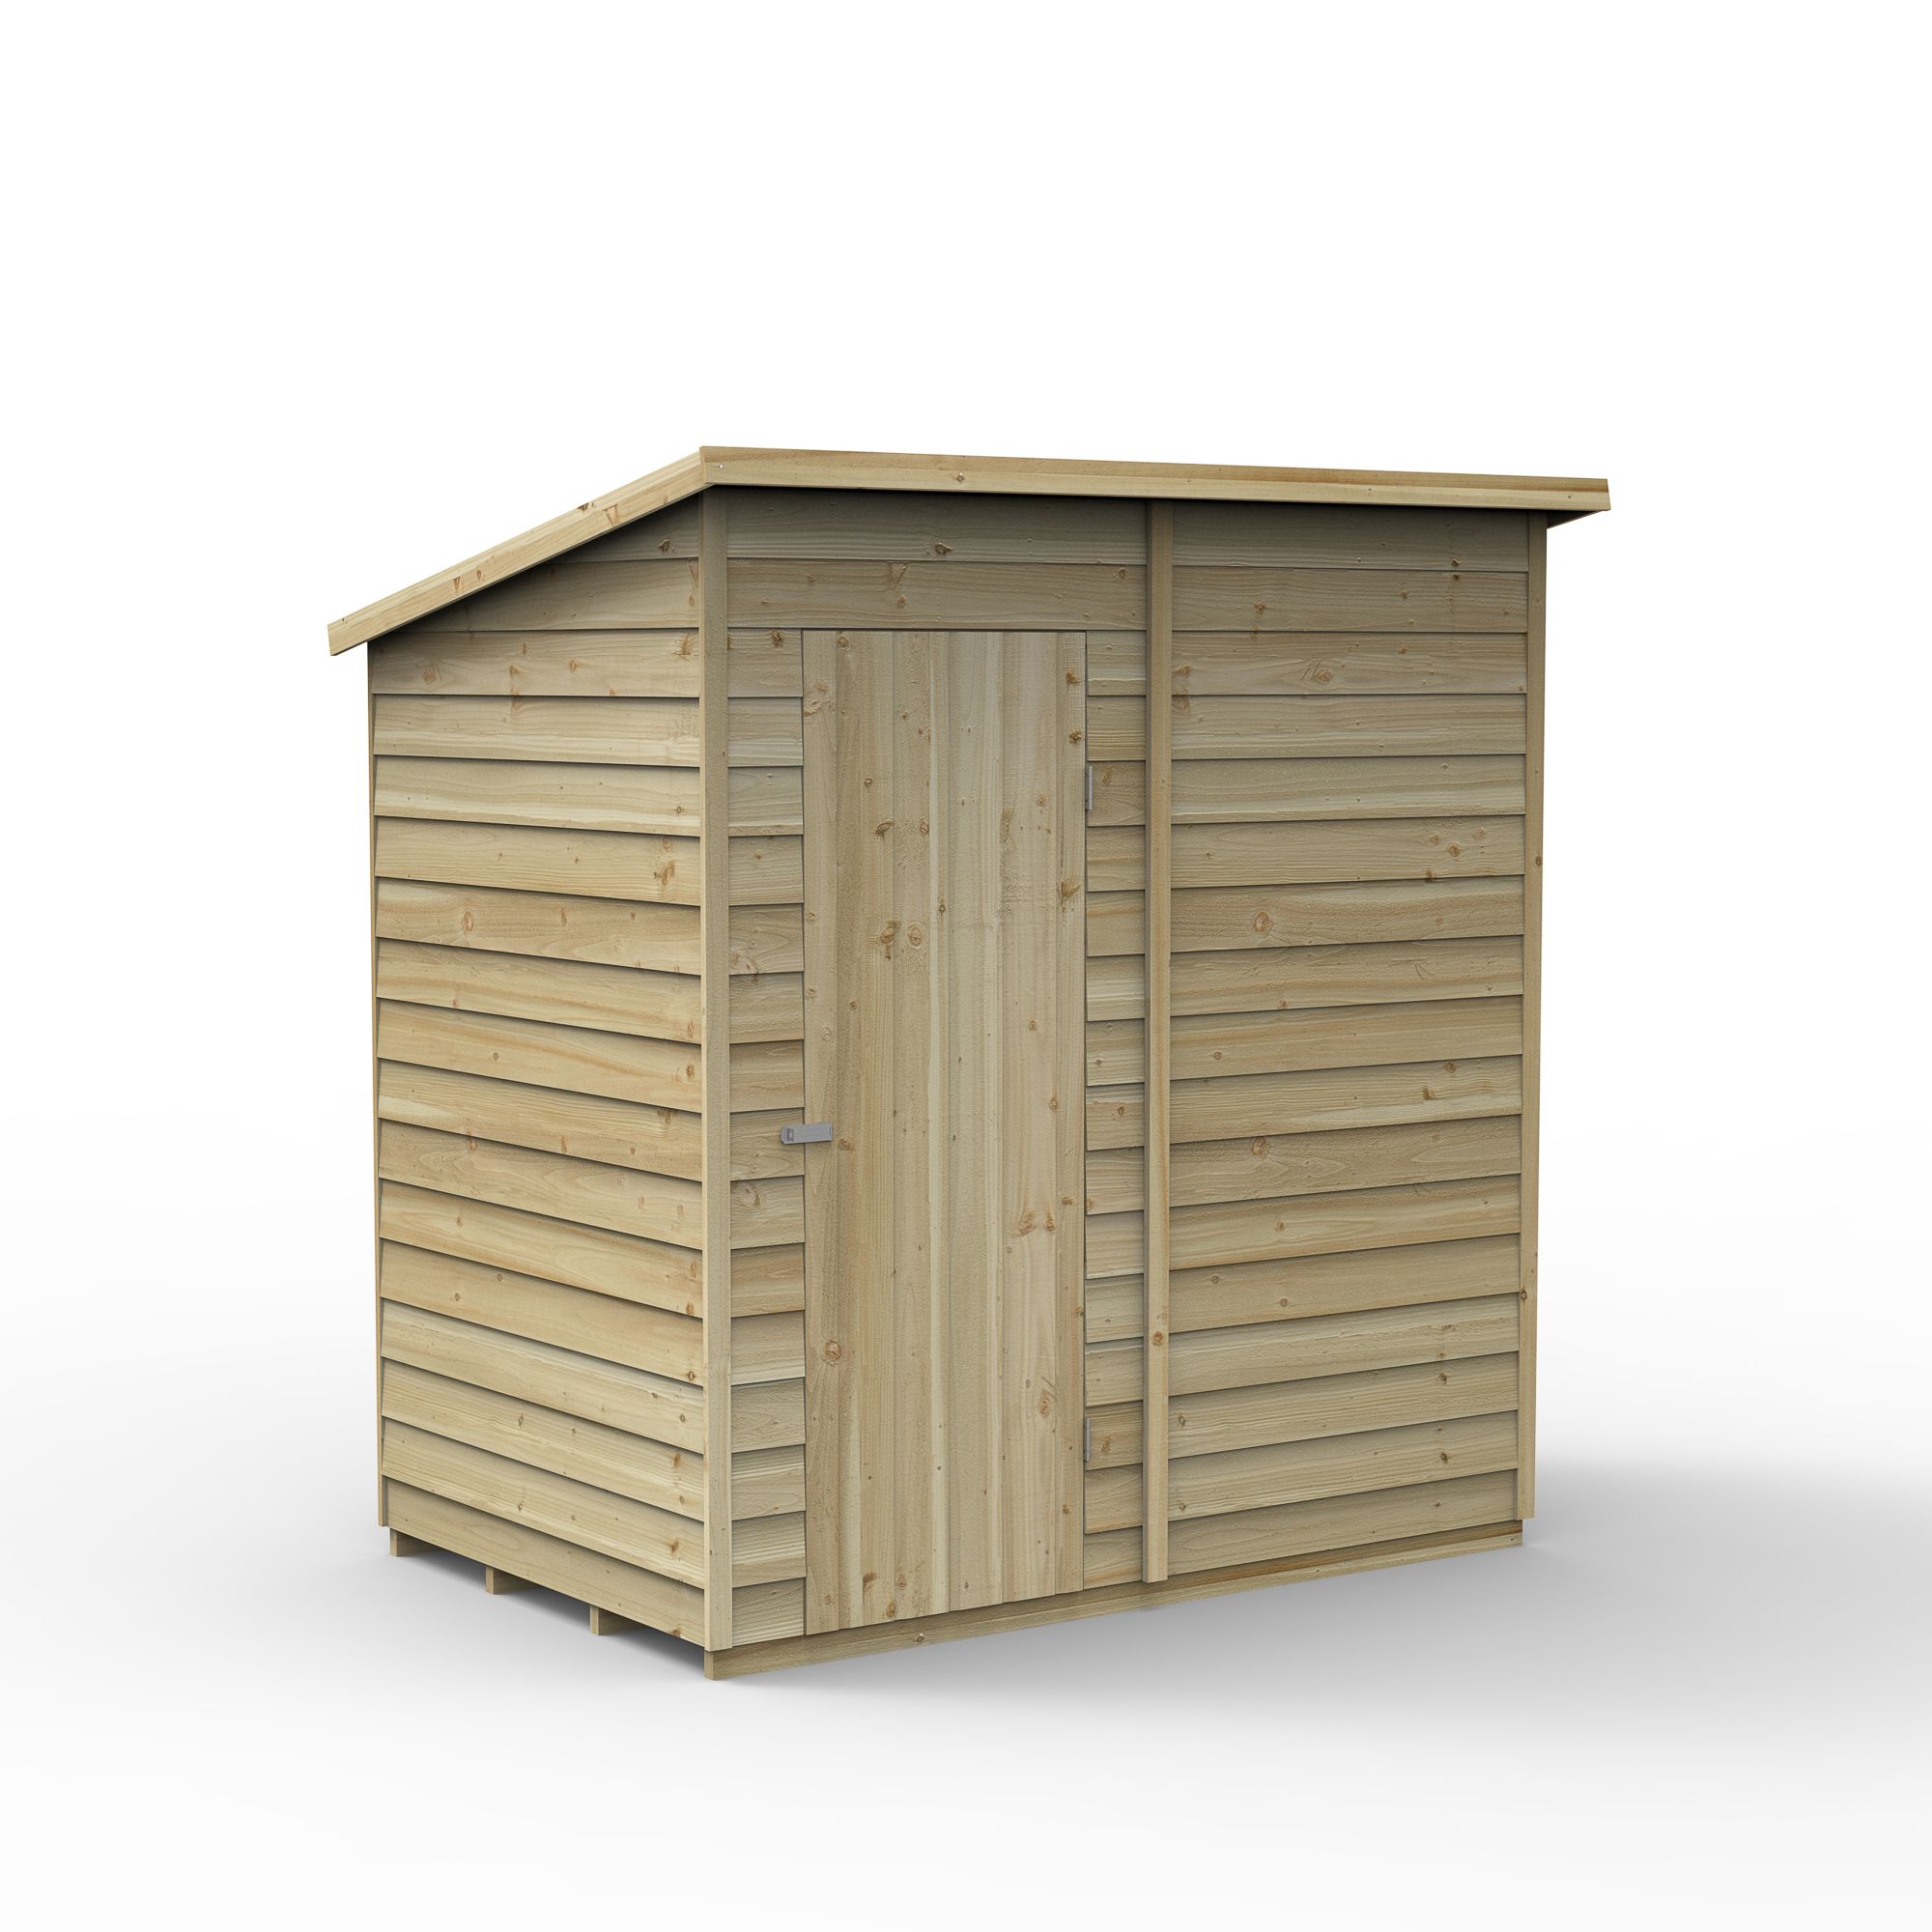 Forest Garden Overlap 6x4 ft Pent Wooden Shed with floor (Base included)